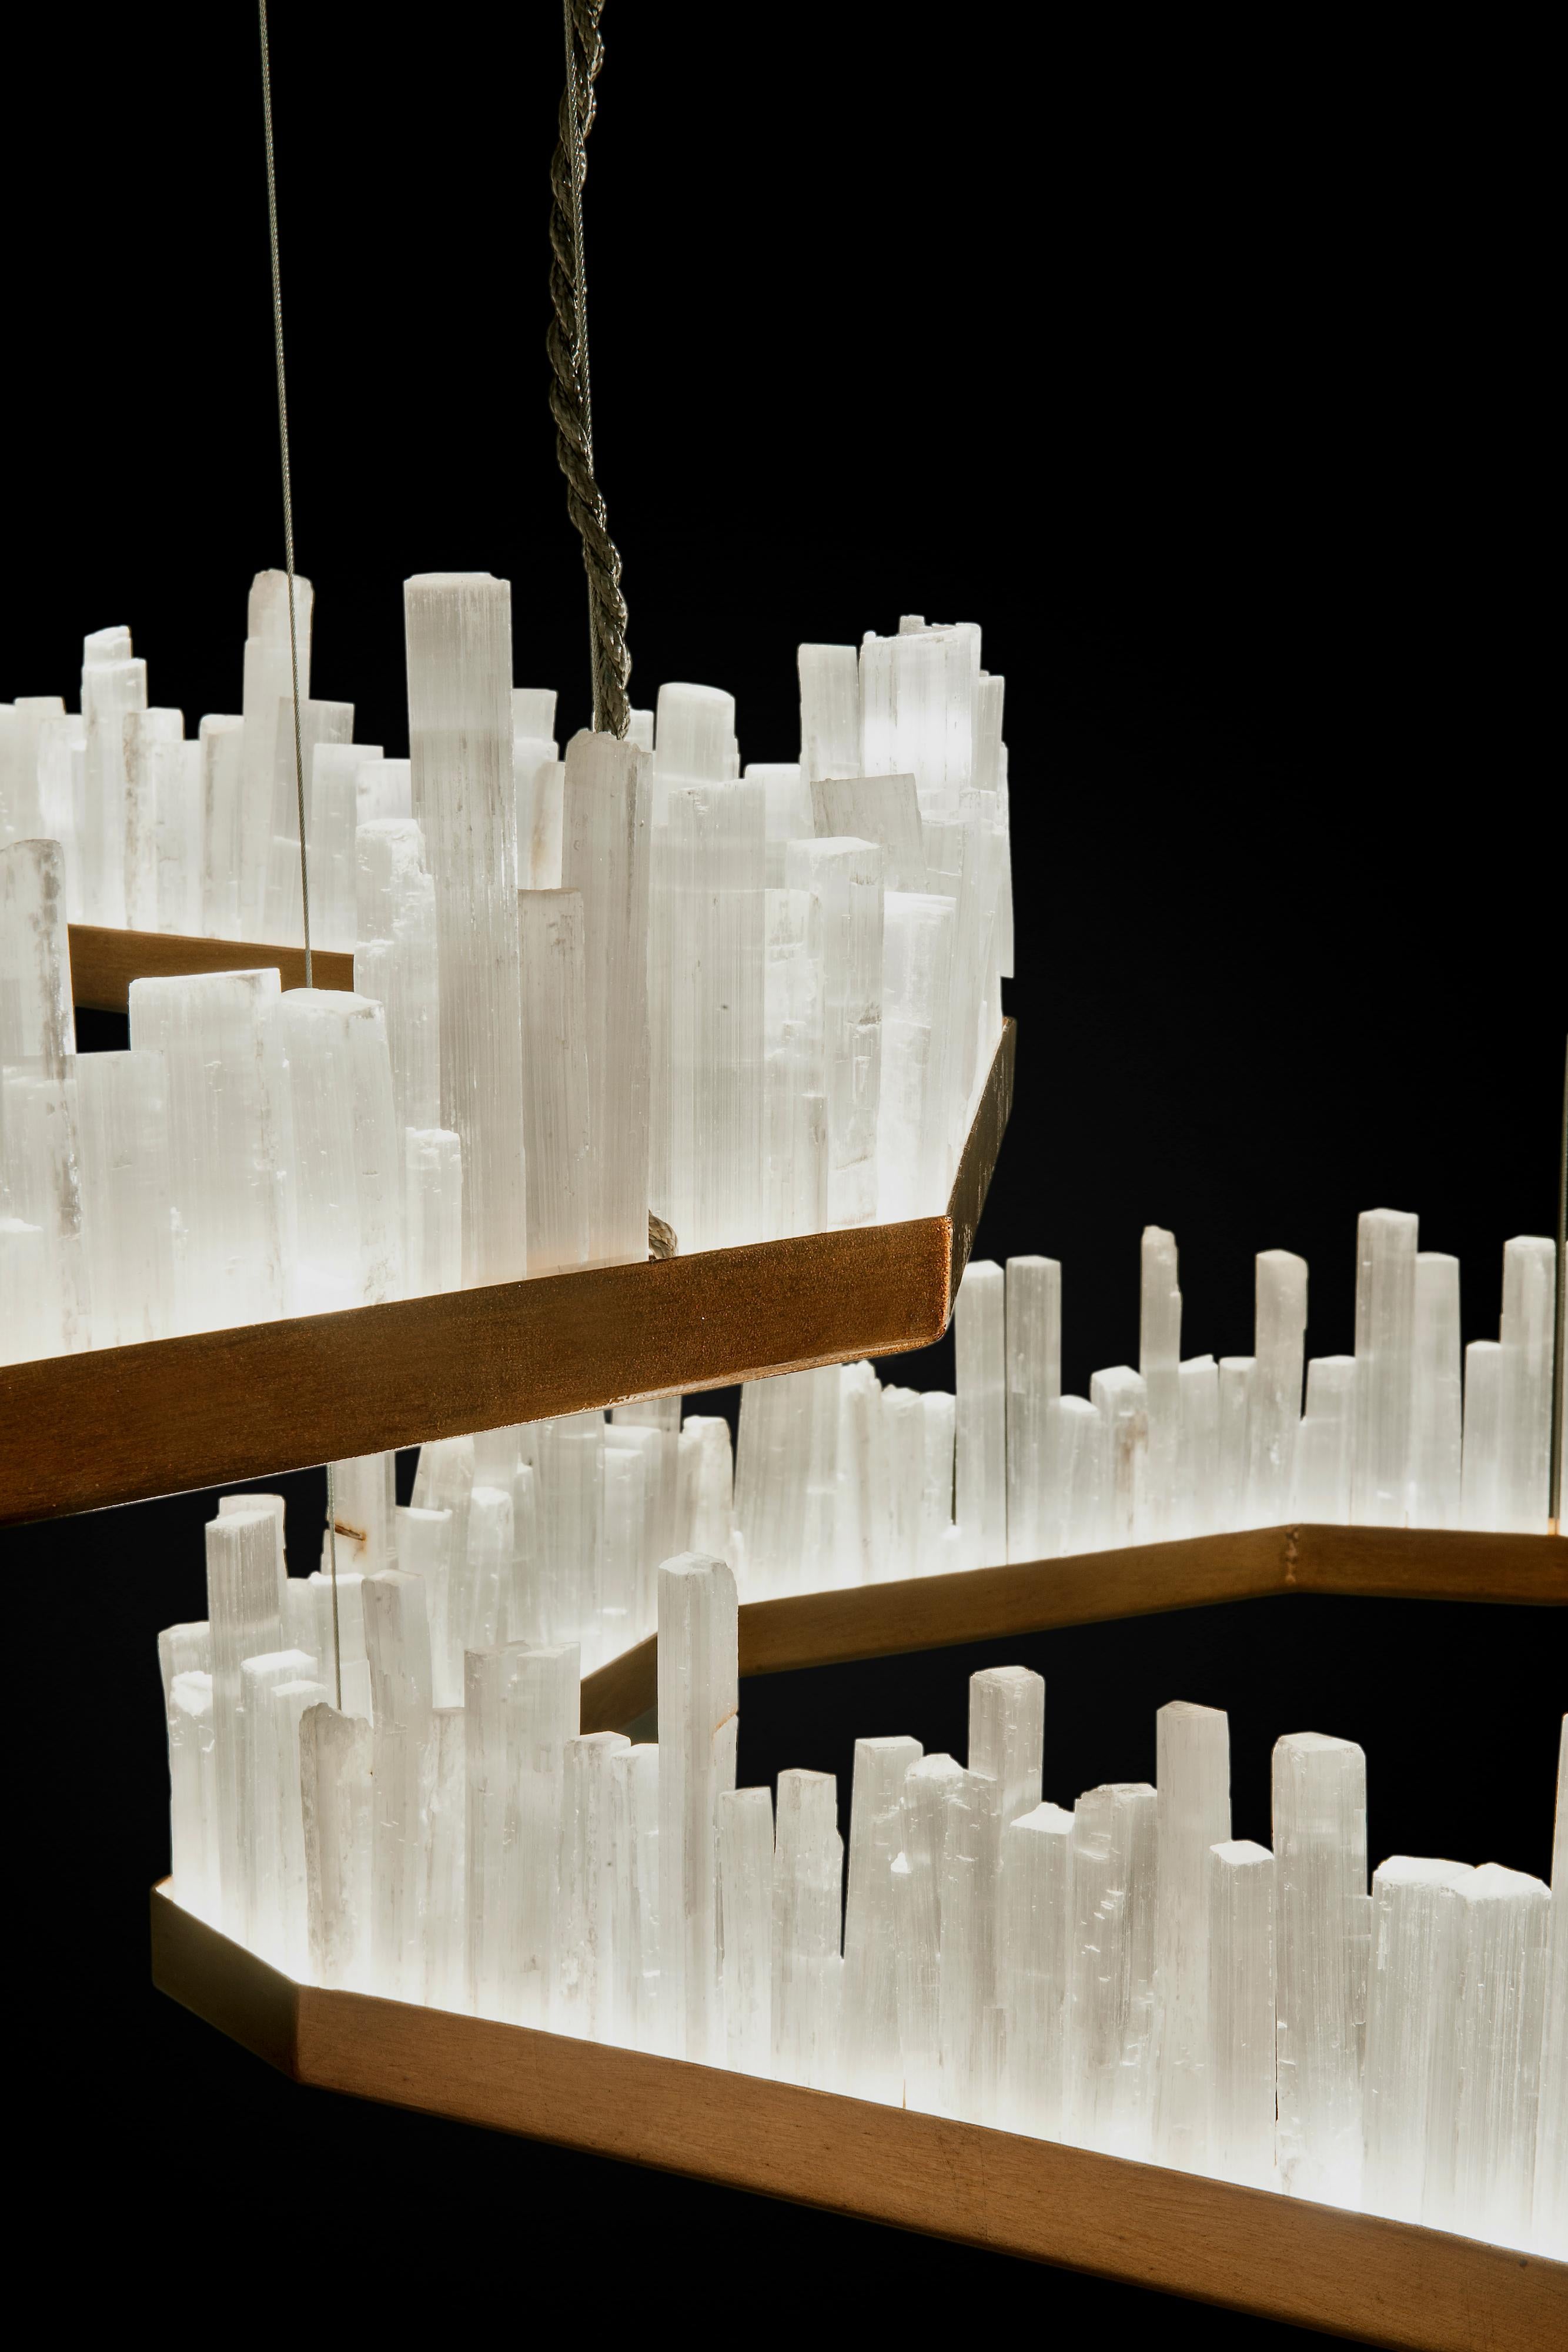 Pair of downtowns, natural selenite pendant lamps
Dimensions: 81 x 81 x 18 cm
Lighting: One led 28W / 1800 Lumens
Finish: Silver leaf, old silver leaf, gold leaf, old gold leaf, copper leaf, rusty, pink golf and brass.
Natural selenite stone.